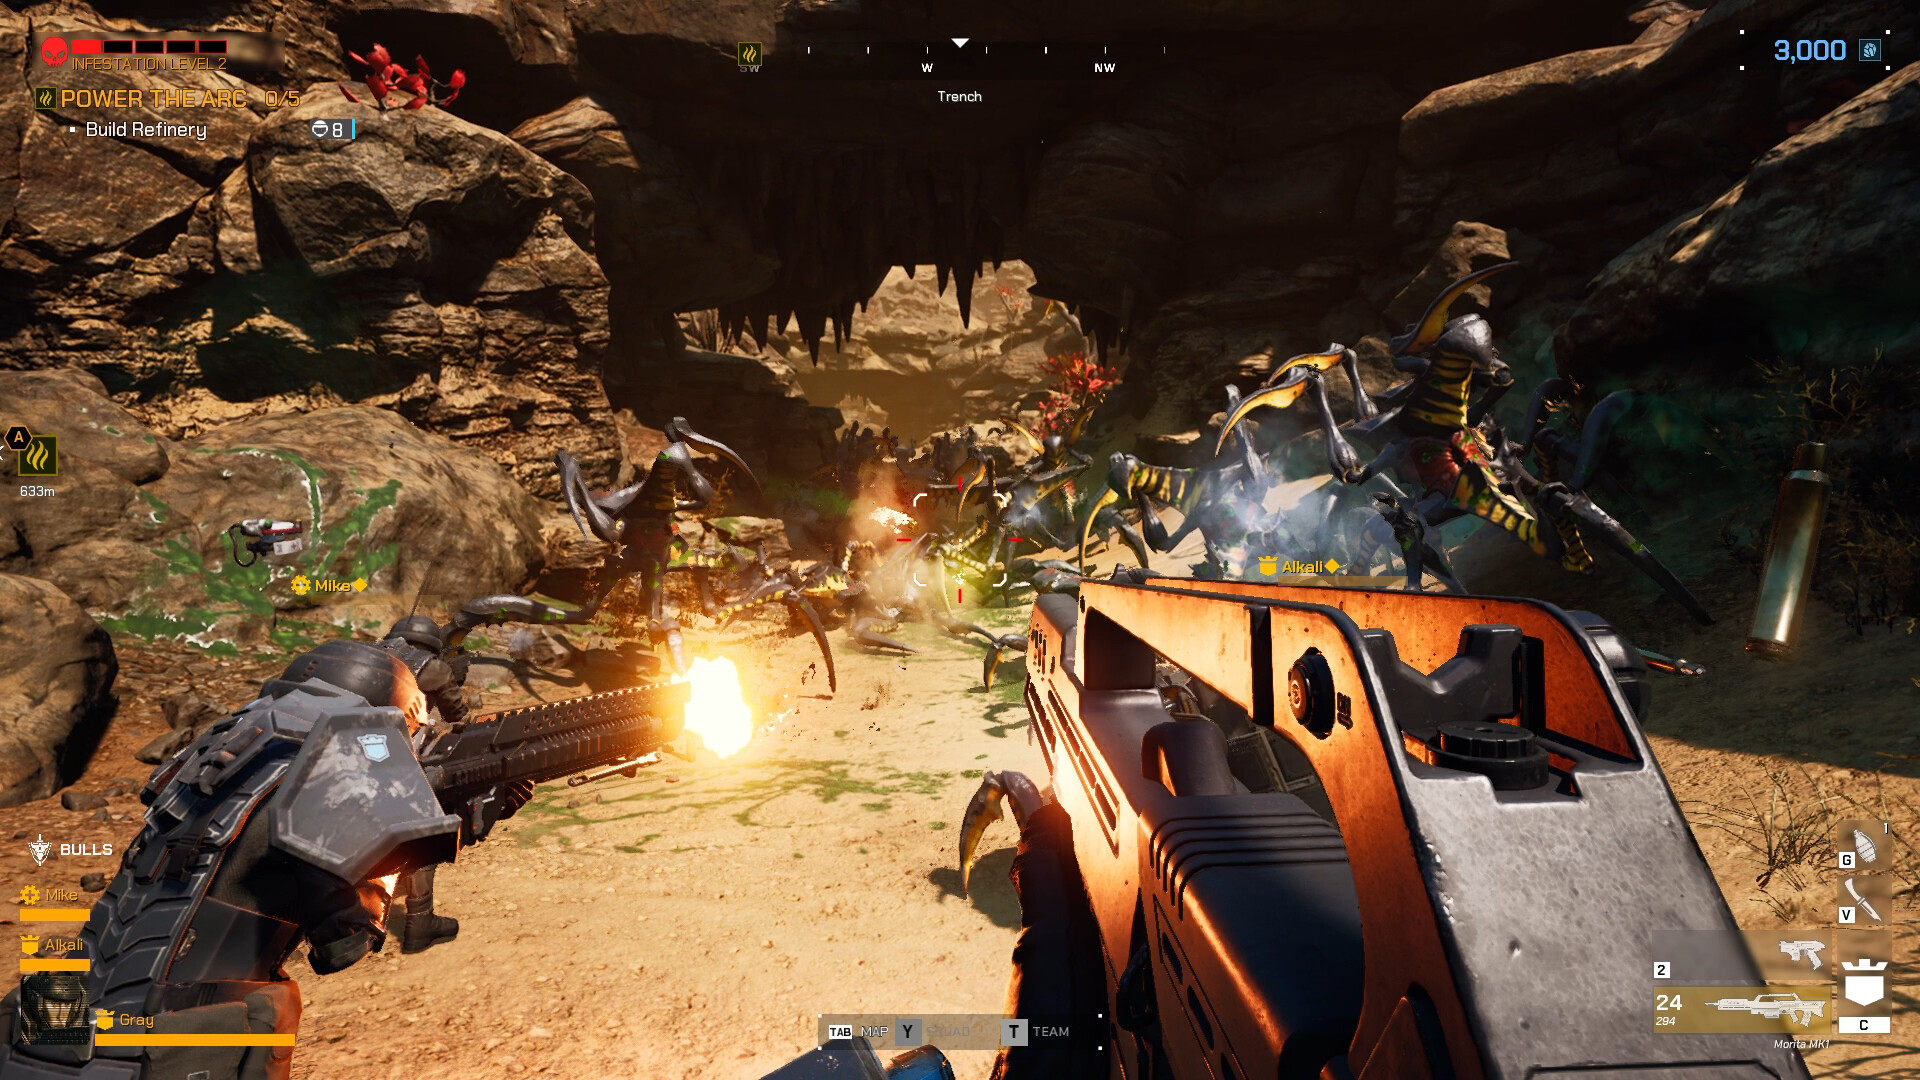 Starship Troopers is the perfect setting for this new sci-fi co-op shooter